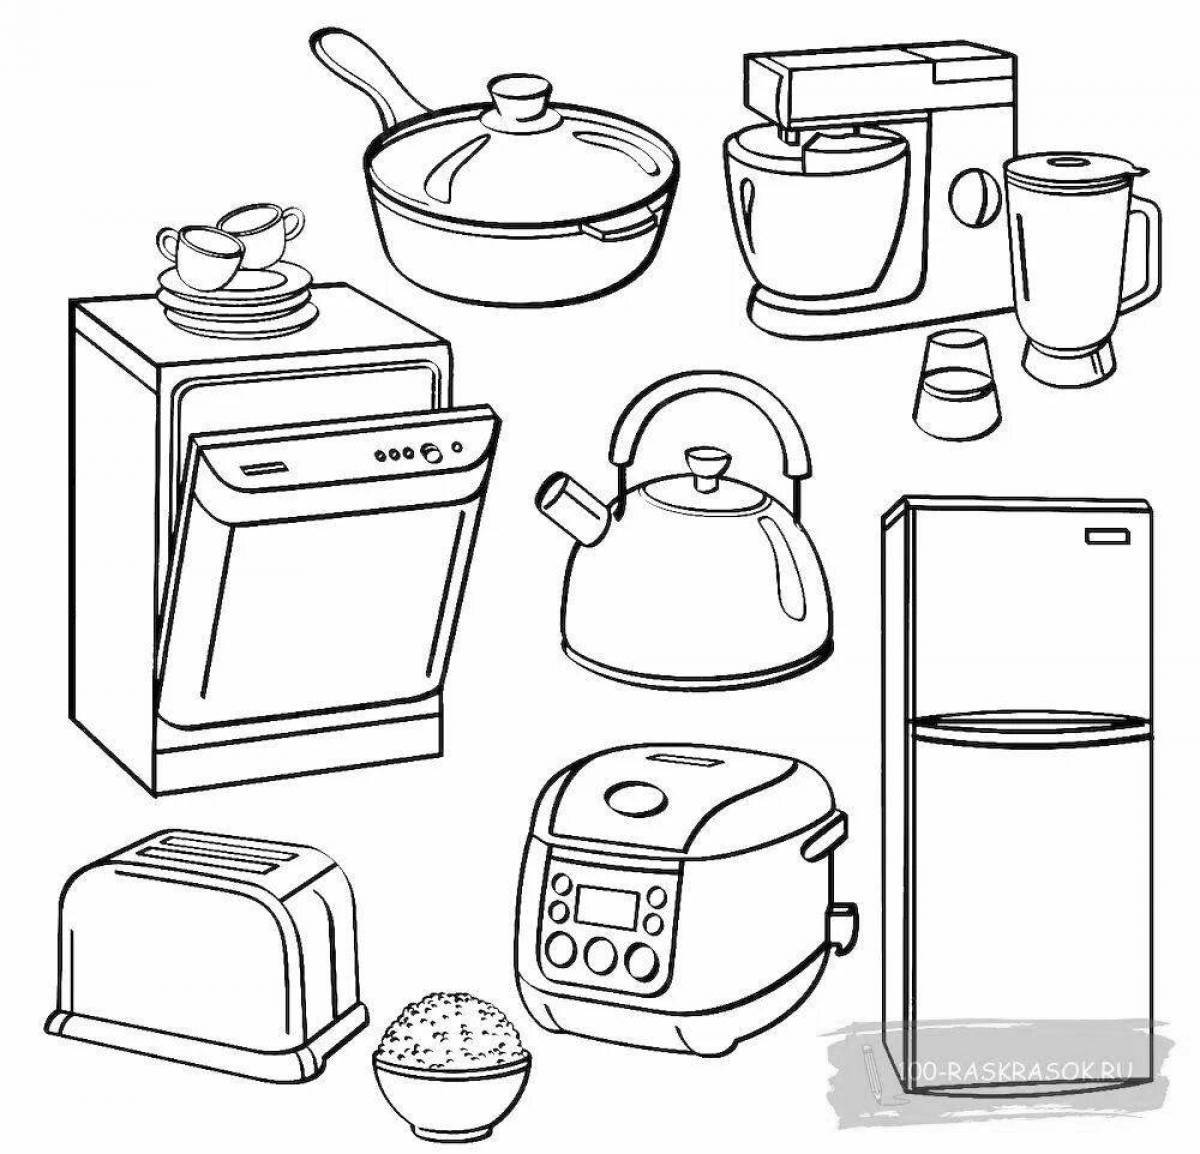 Coloring page amazing electrical devices